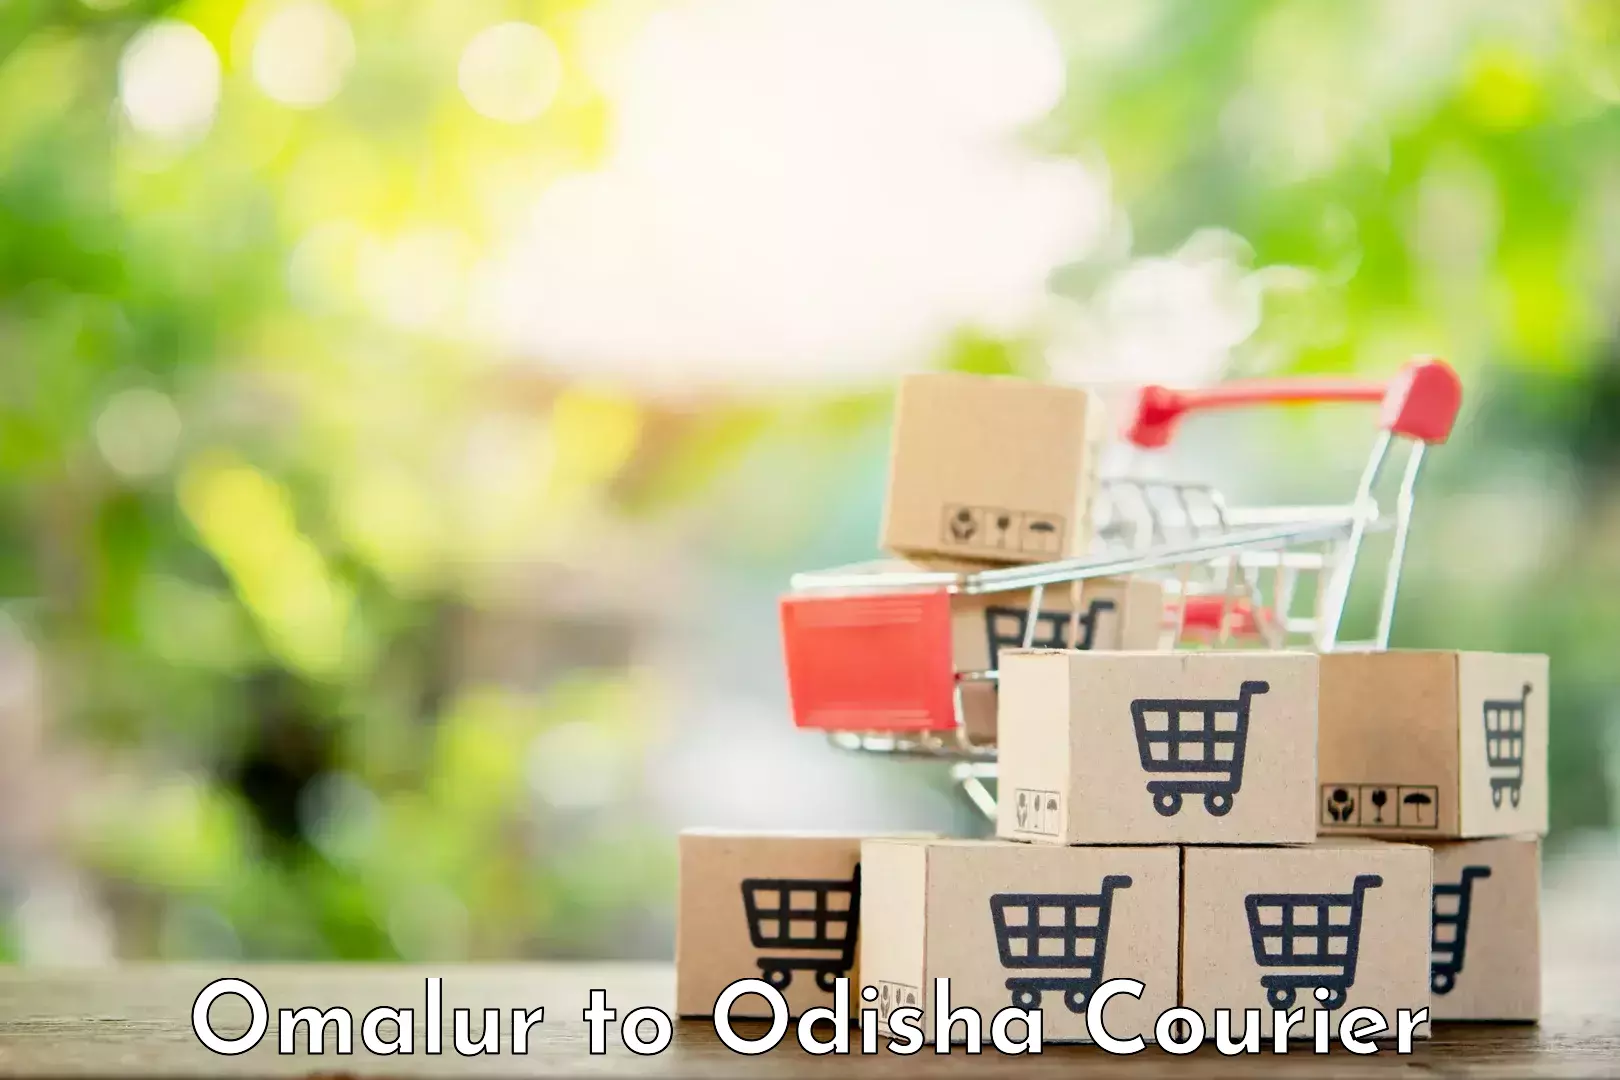 Multi-national courier services Omalur to Jeypore